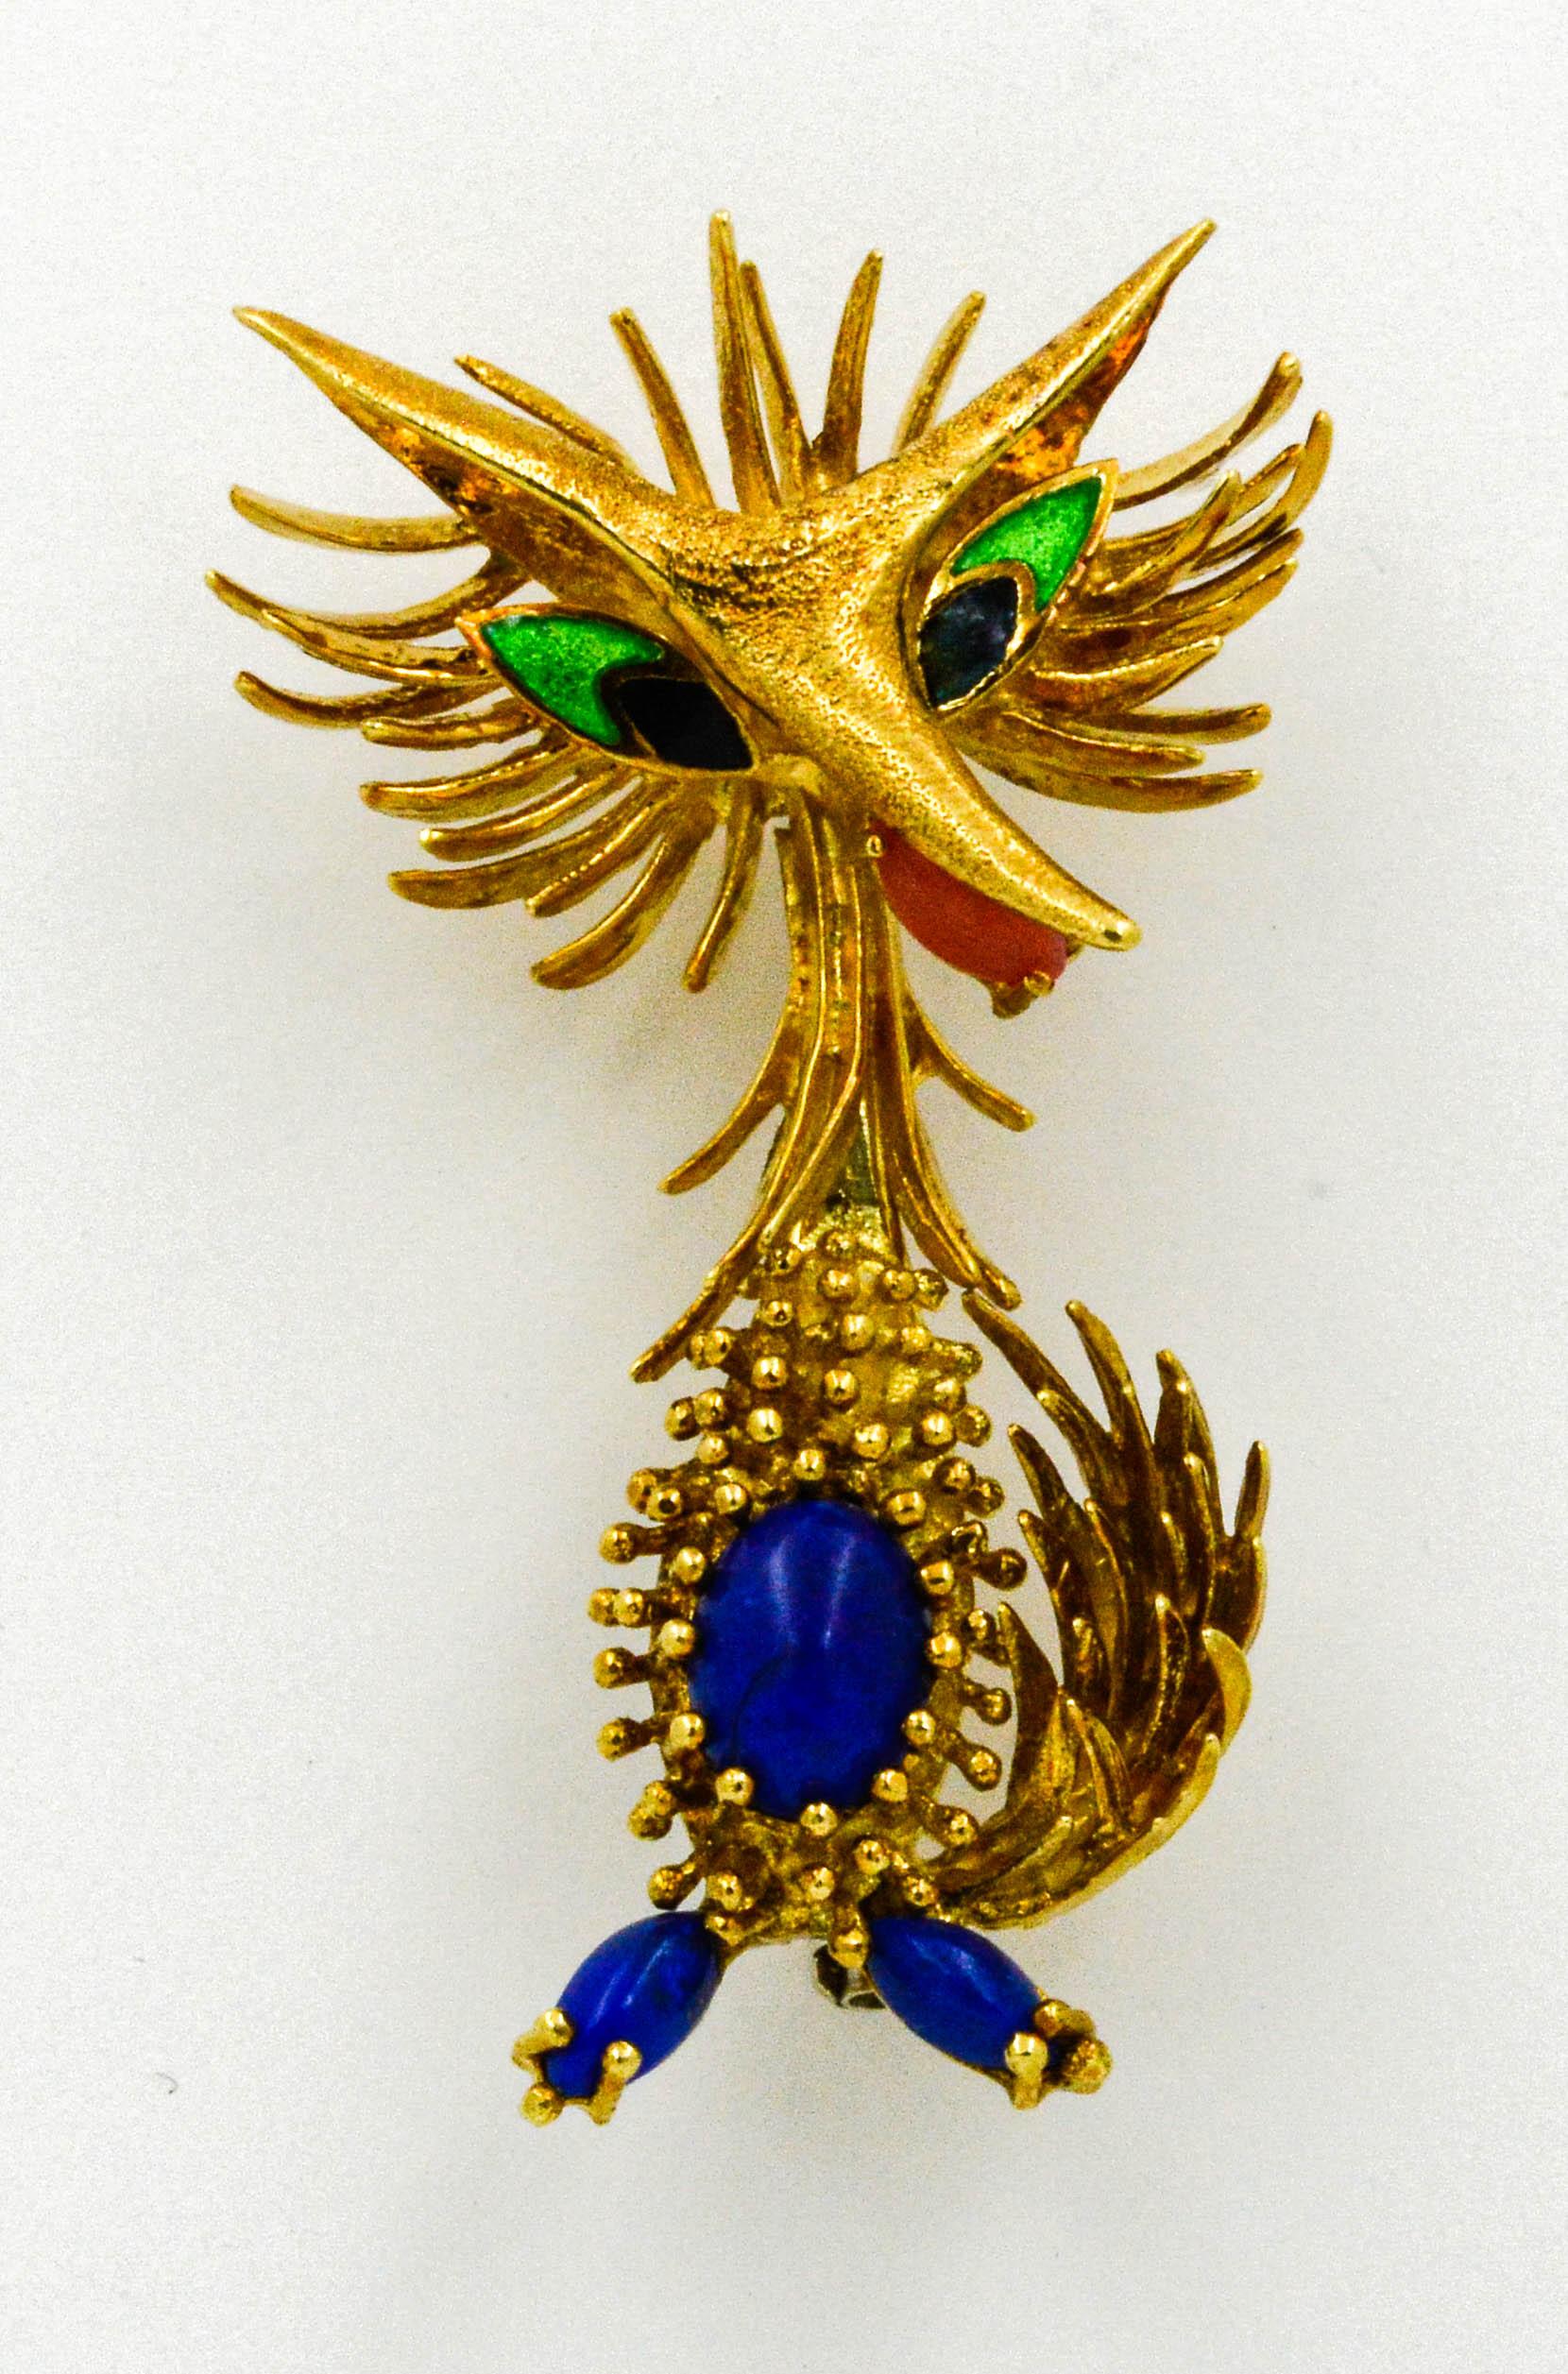 Circa 1945-1950 in a Retro style, we offer this stylized Toliro Animal. This roadrunner brooch is 18 karat yellow gold and set with 3 cabochon cut Lapiz Lazuli, 1 cabochon Coral, and accented with enameling.